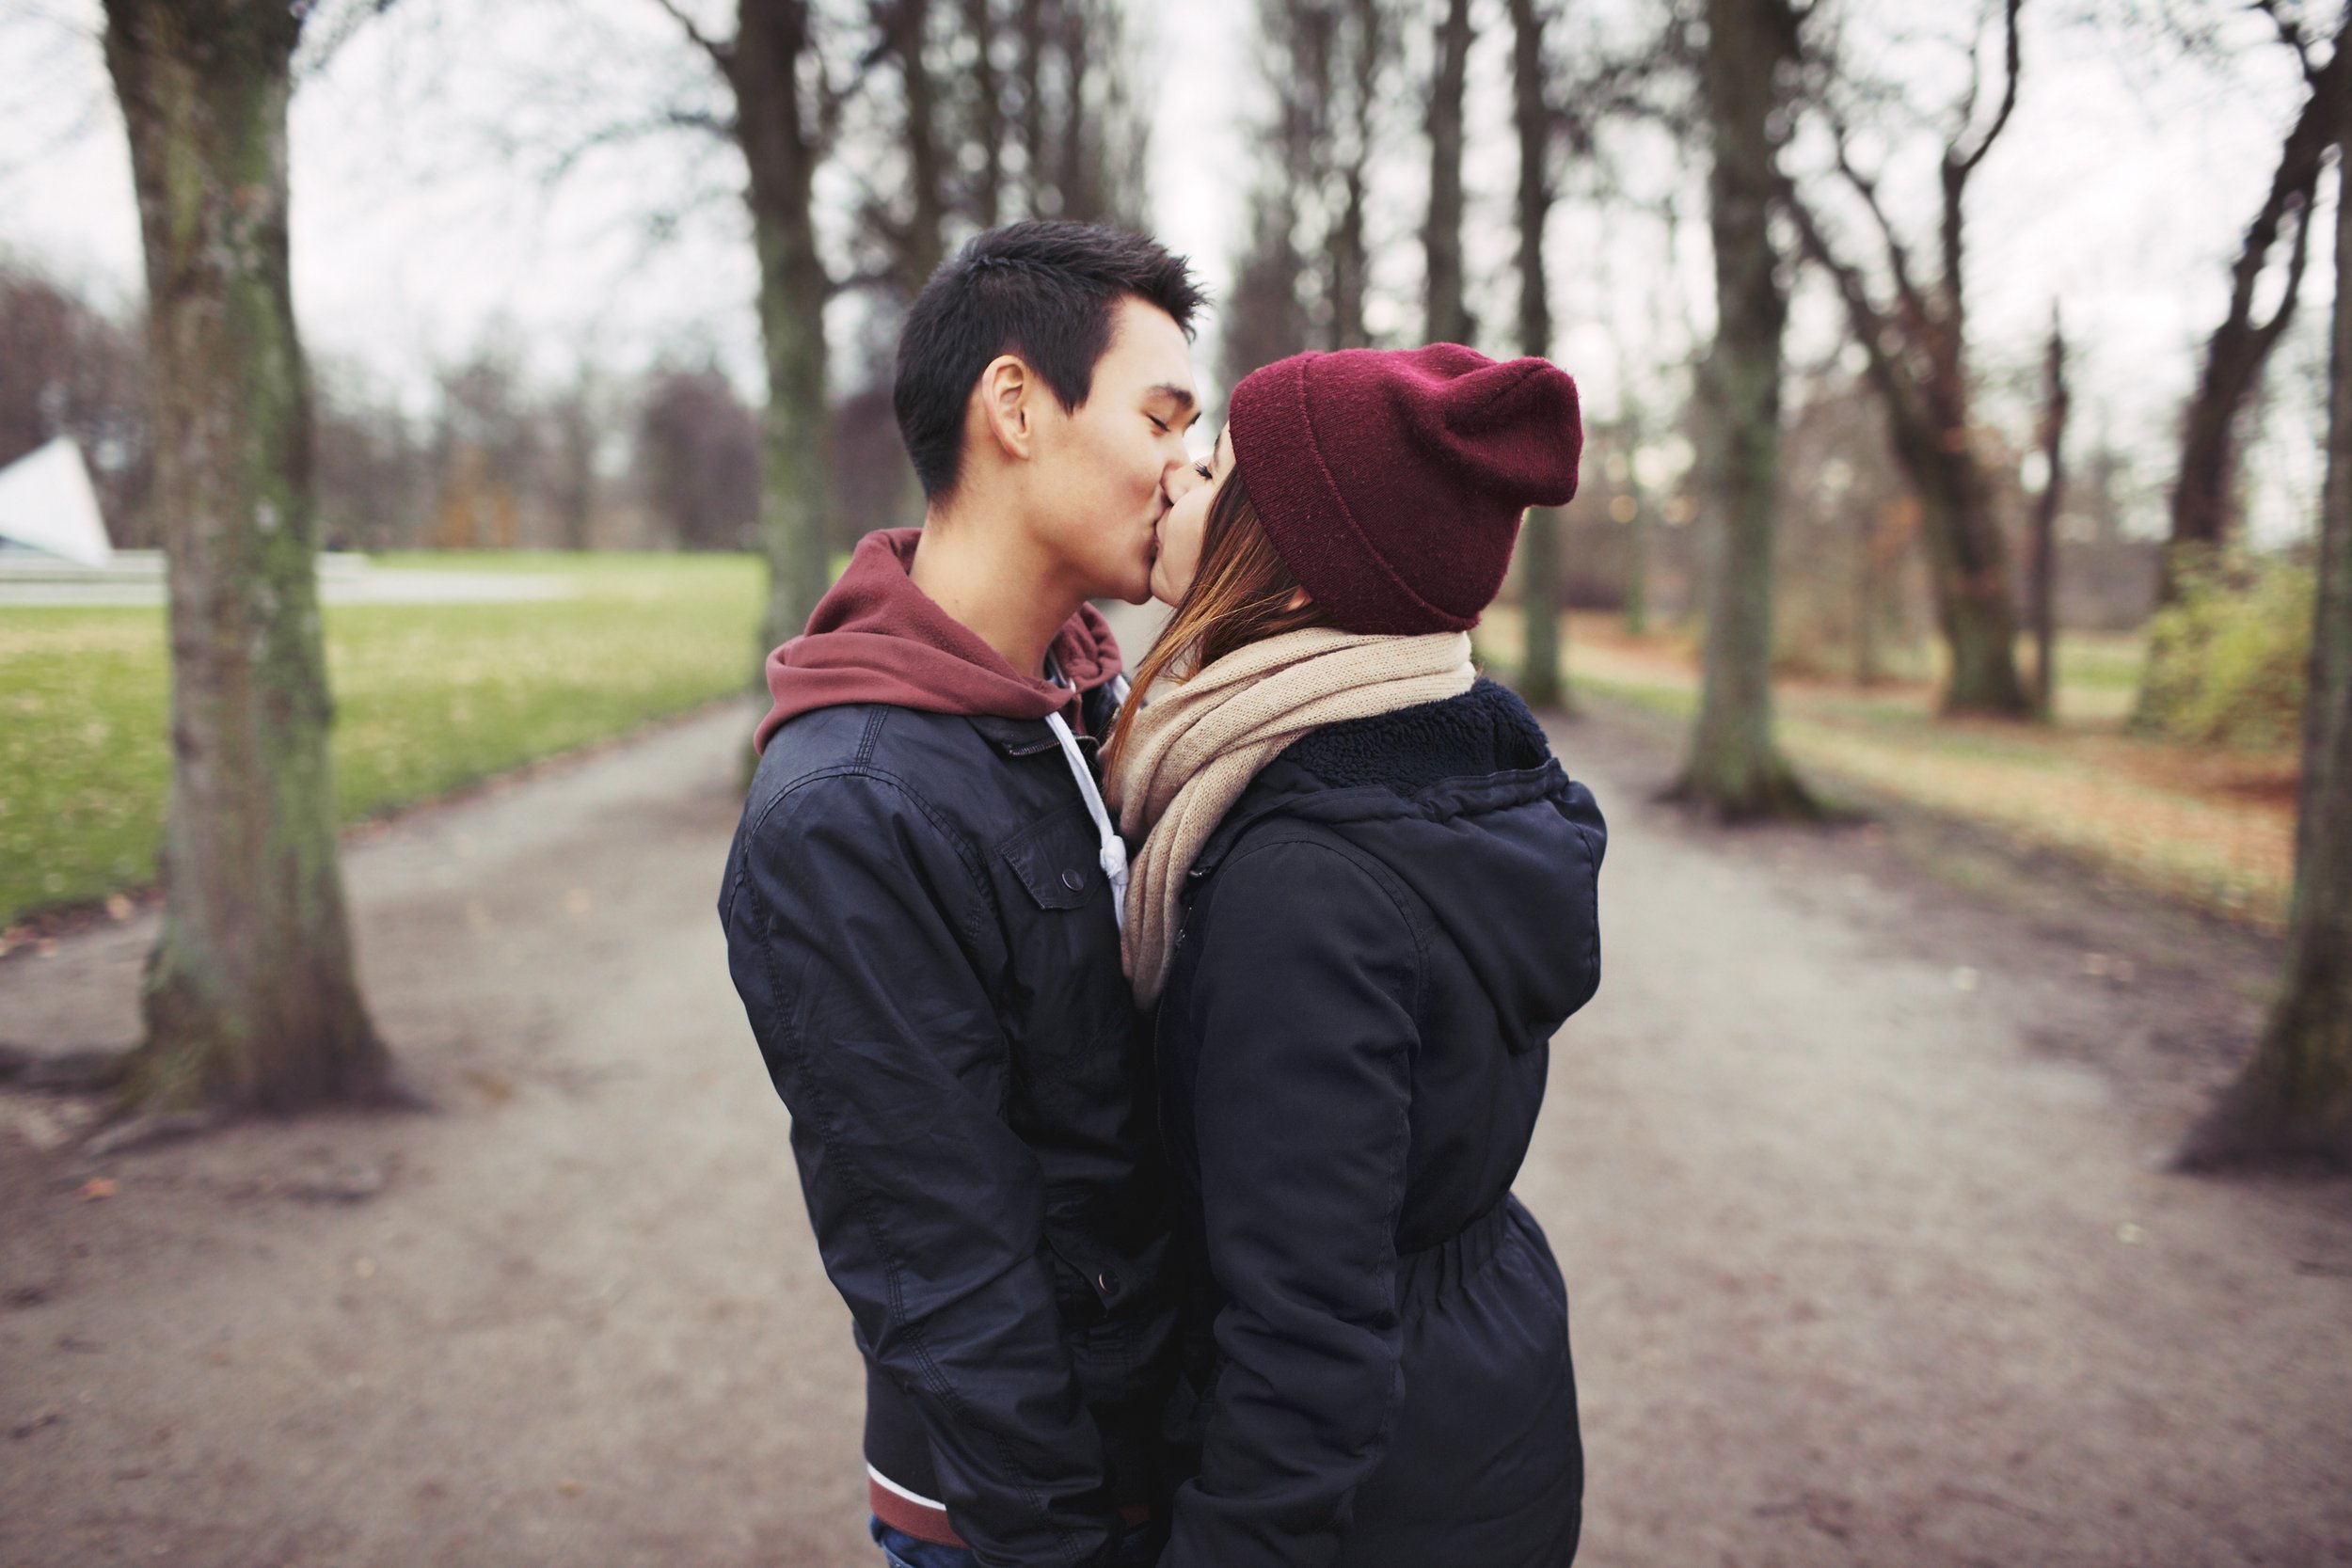 loving-young-couple-kissing-outdoors-in-the-park-mixed-race-man-and-woman-teenage-love-SBI-301327297.jpg